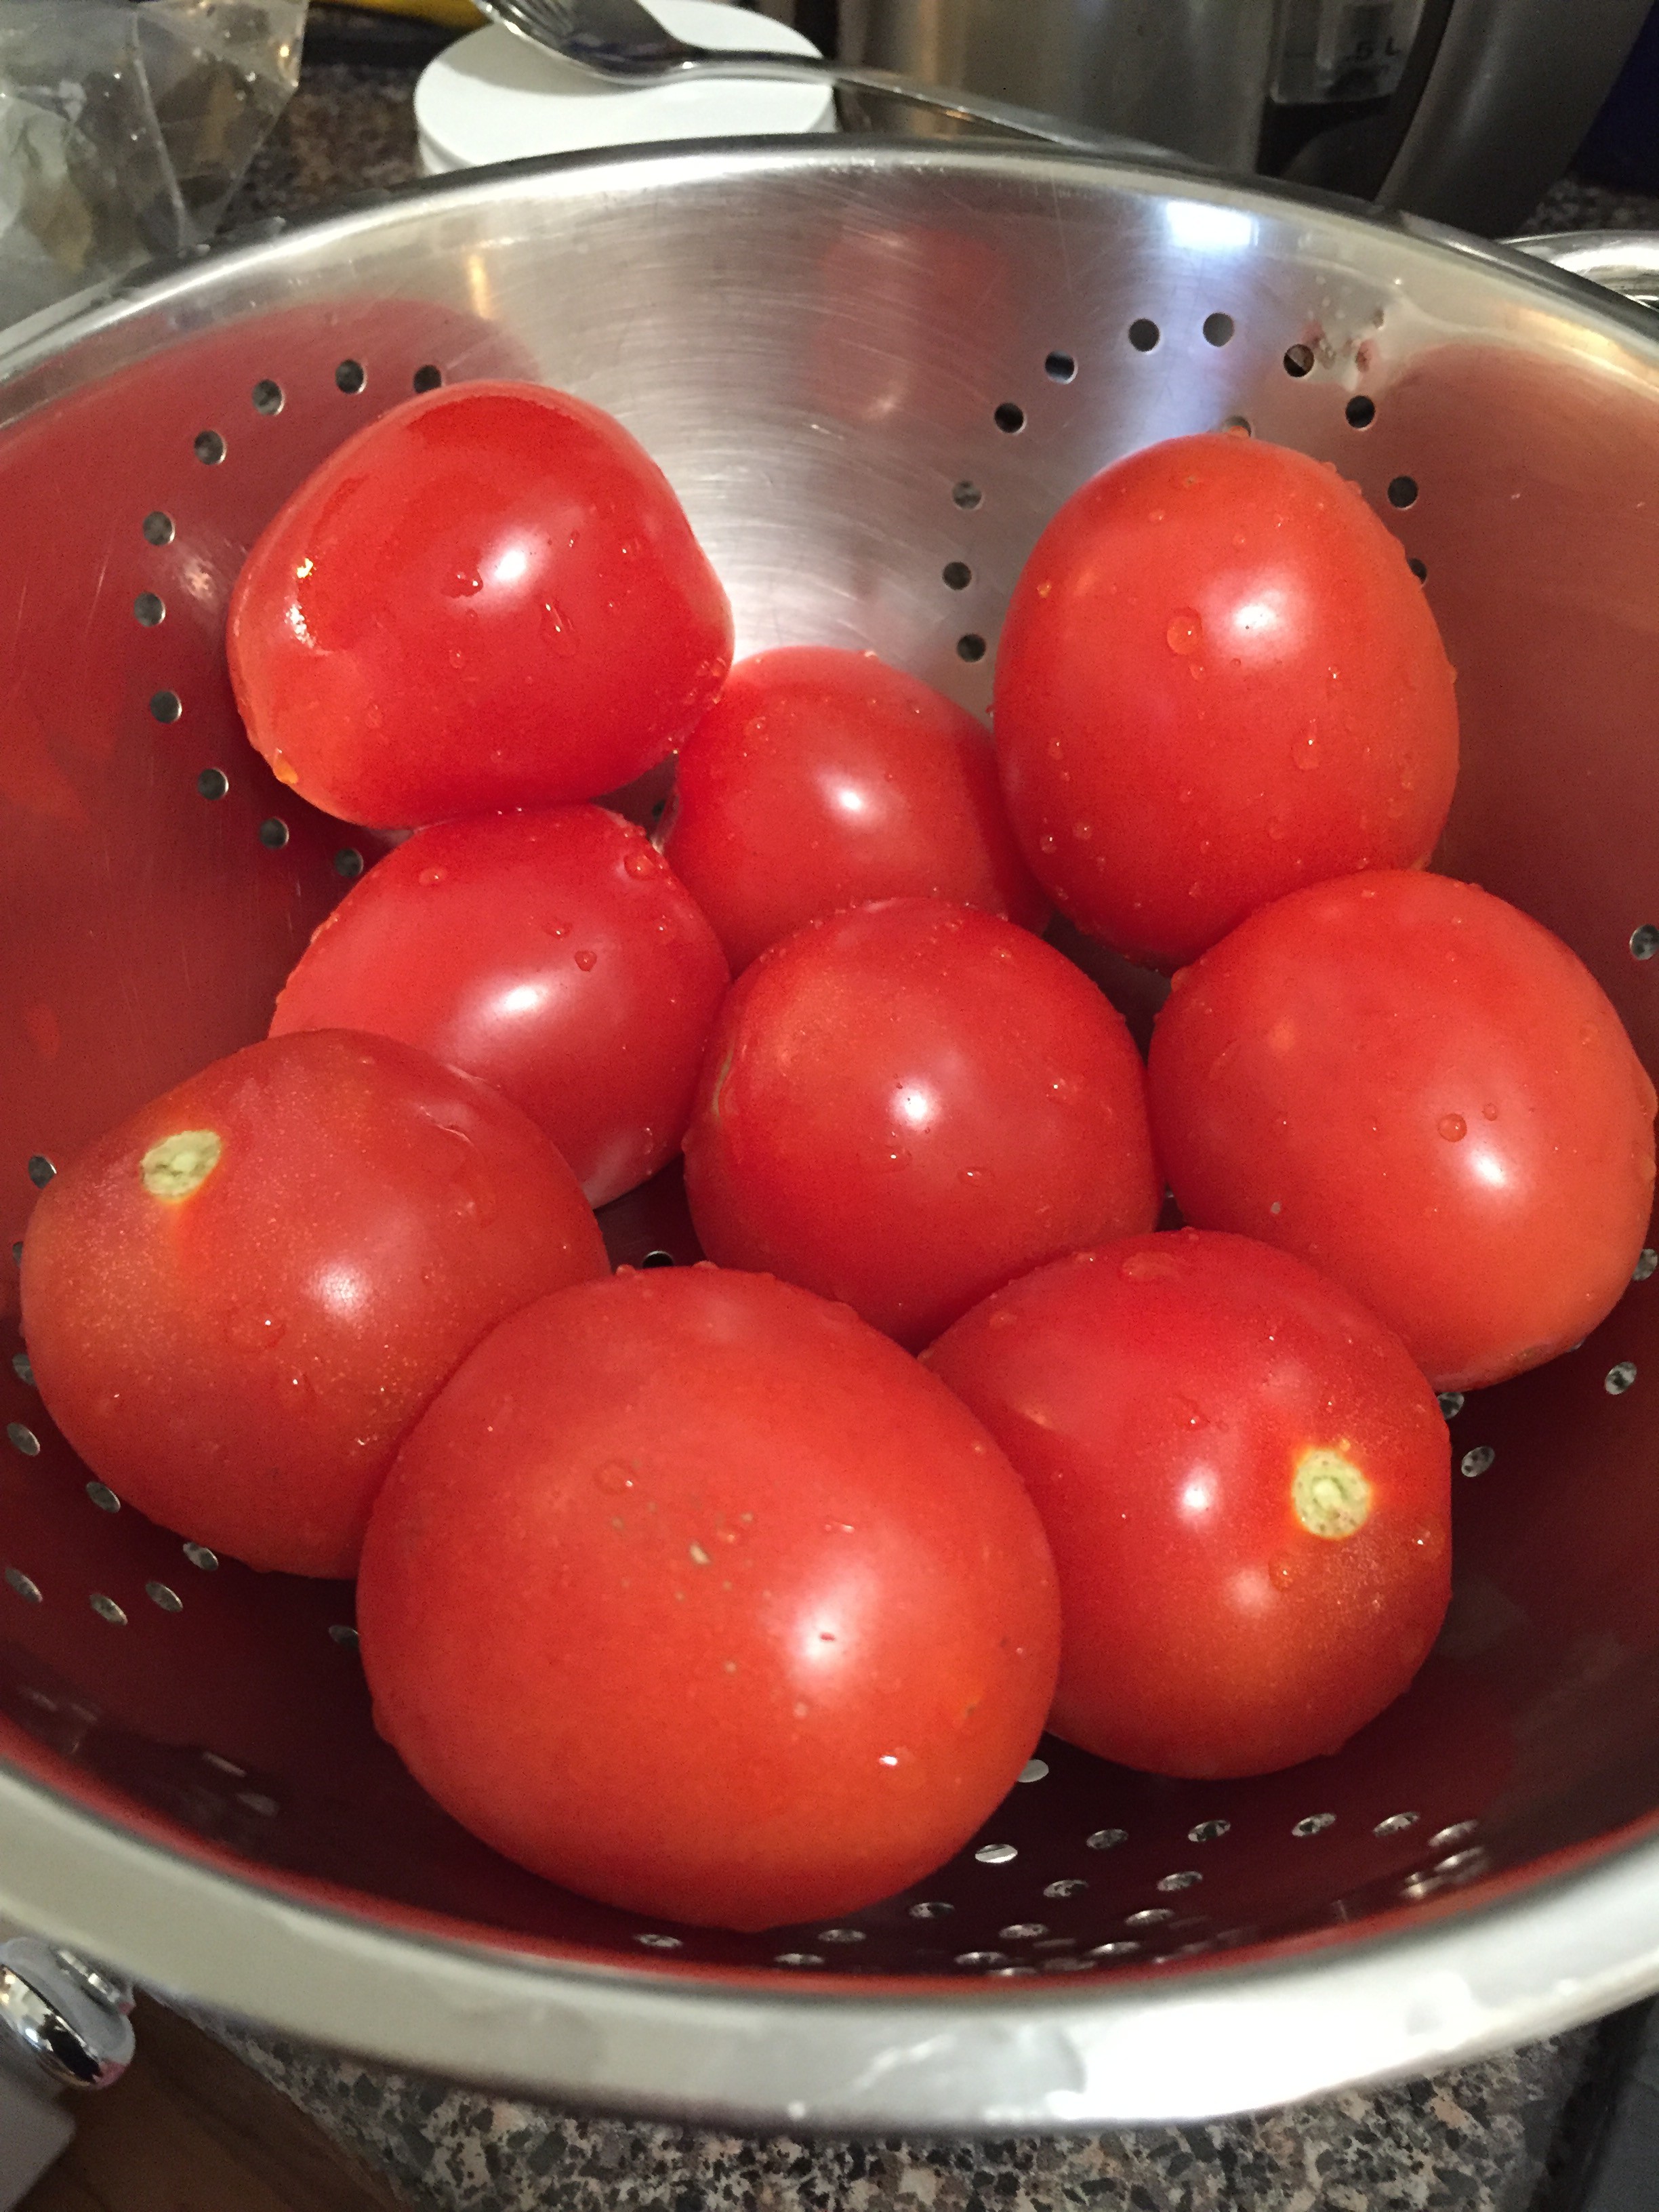 Signs of summer: fresh, red tomatoes